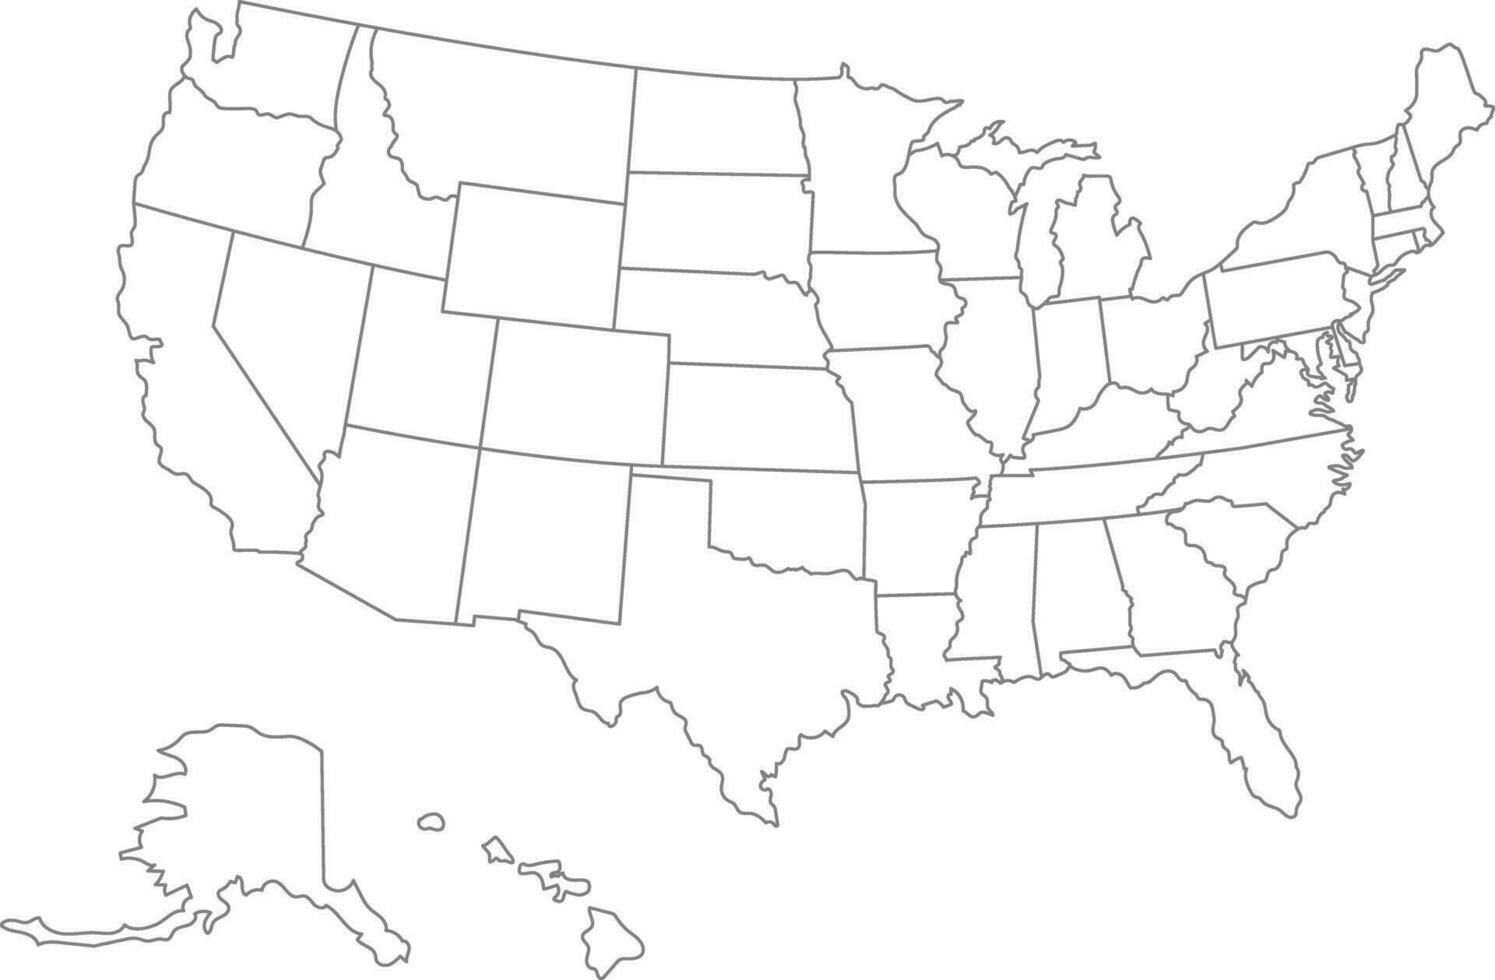 United States of America map. USA Map With Divided States. Outline US map. vector